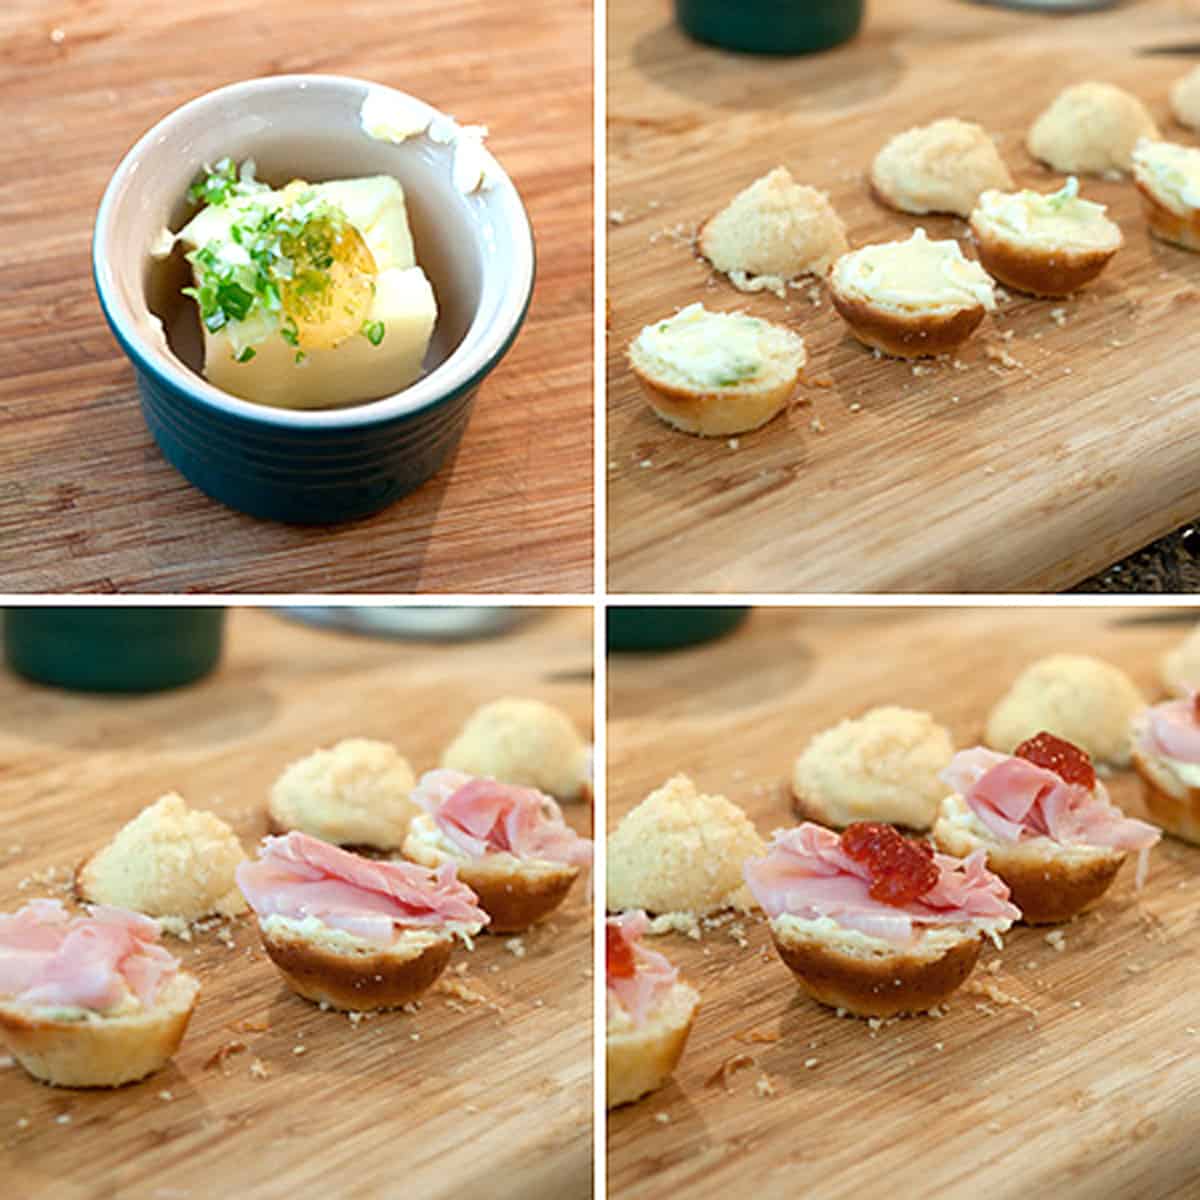 Collage showing how to assemble cornbread and ham muffins.